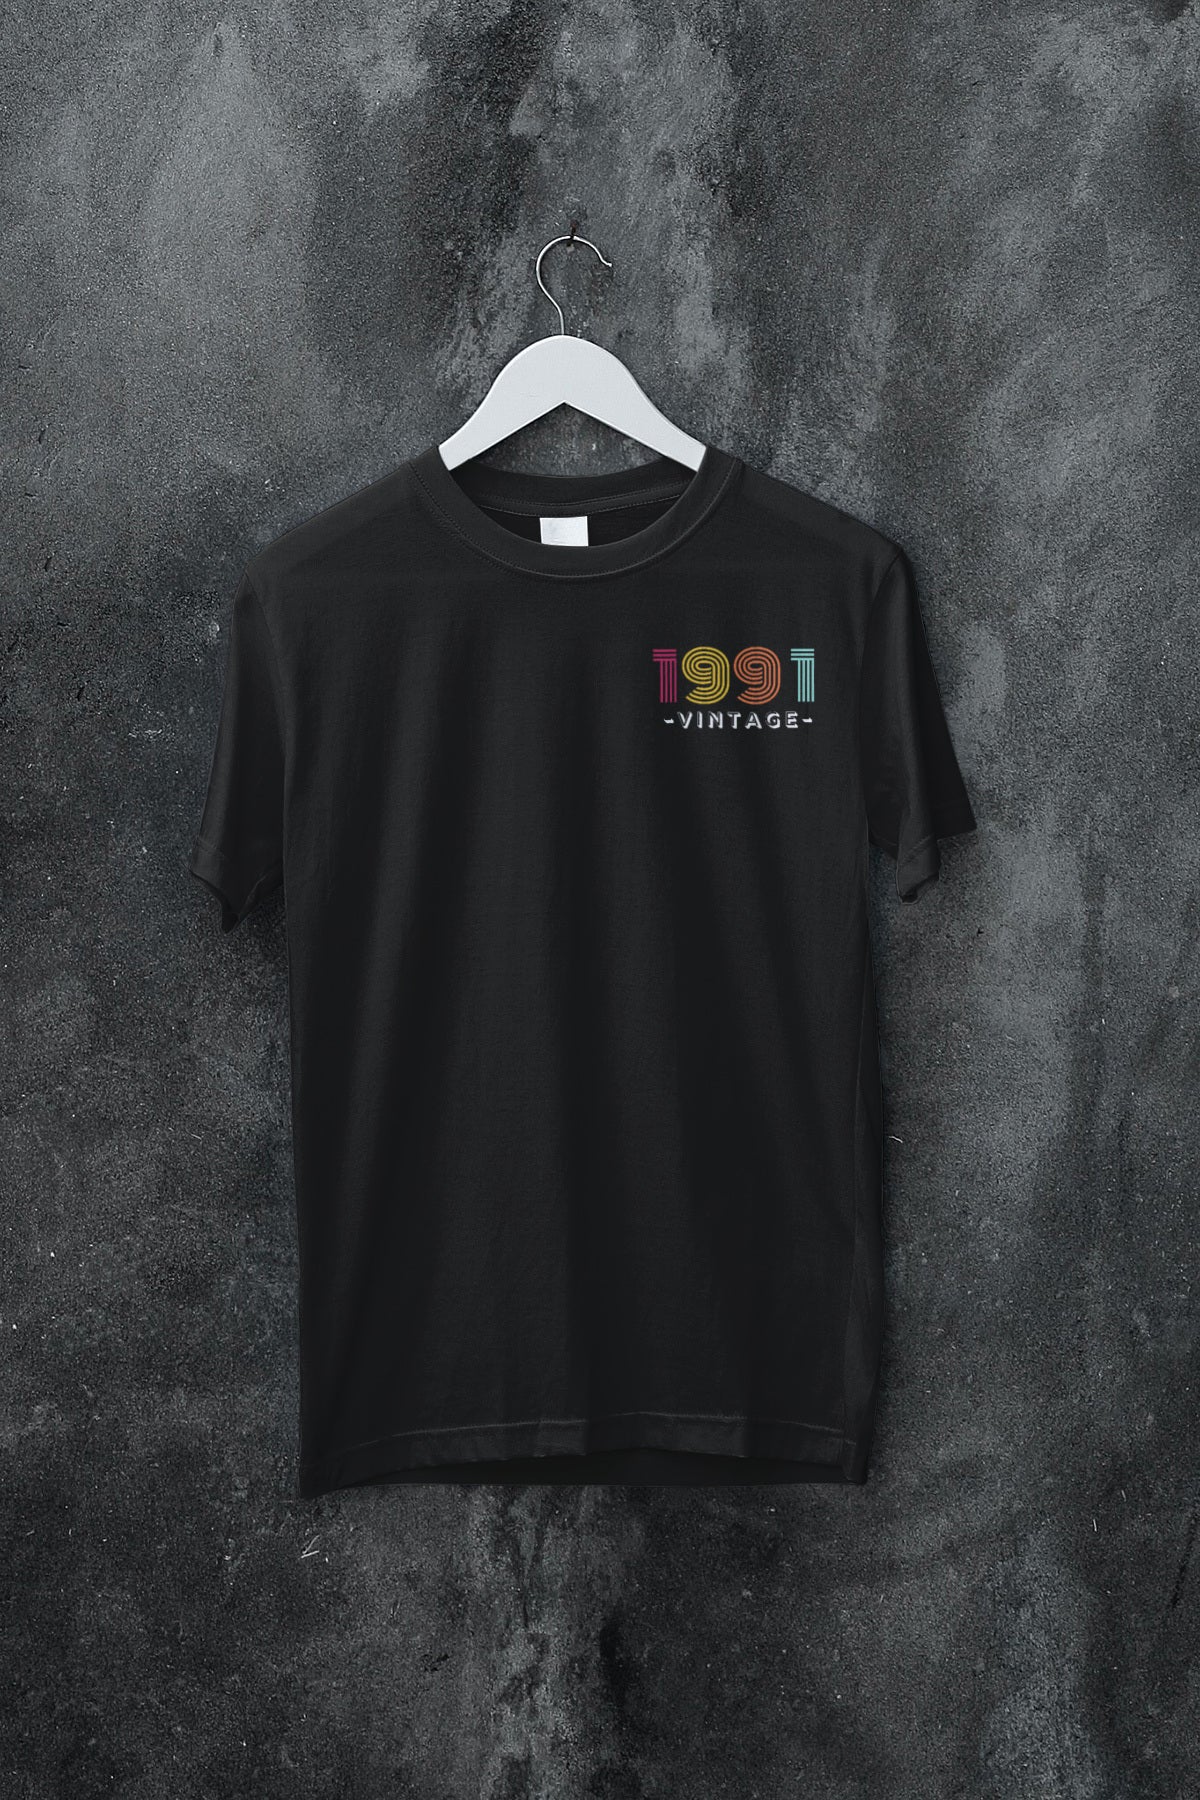 1991 Vintage Unisex T-Shirt: Relive the Retro Charm of the '90s with this Nostalgic Tee.